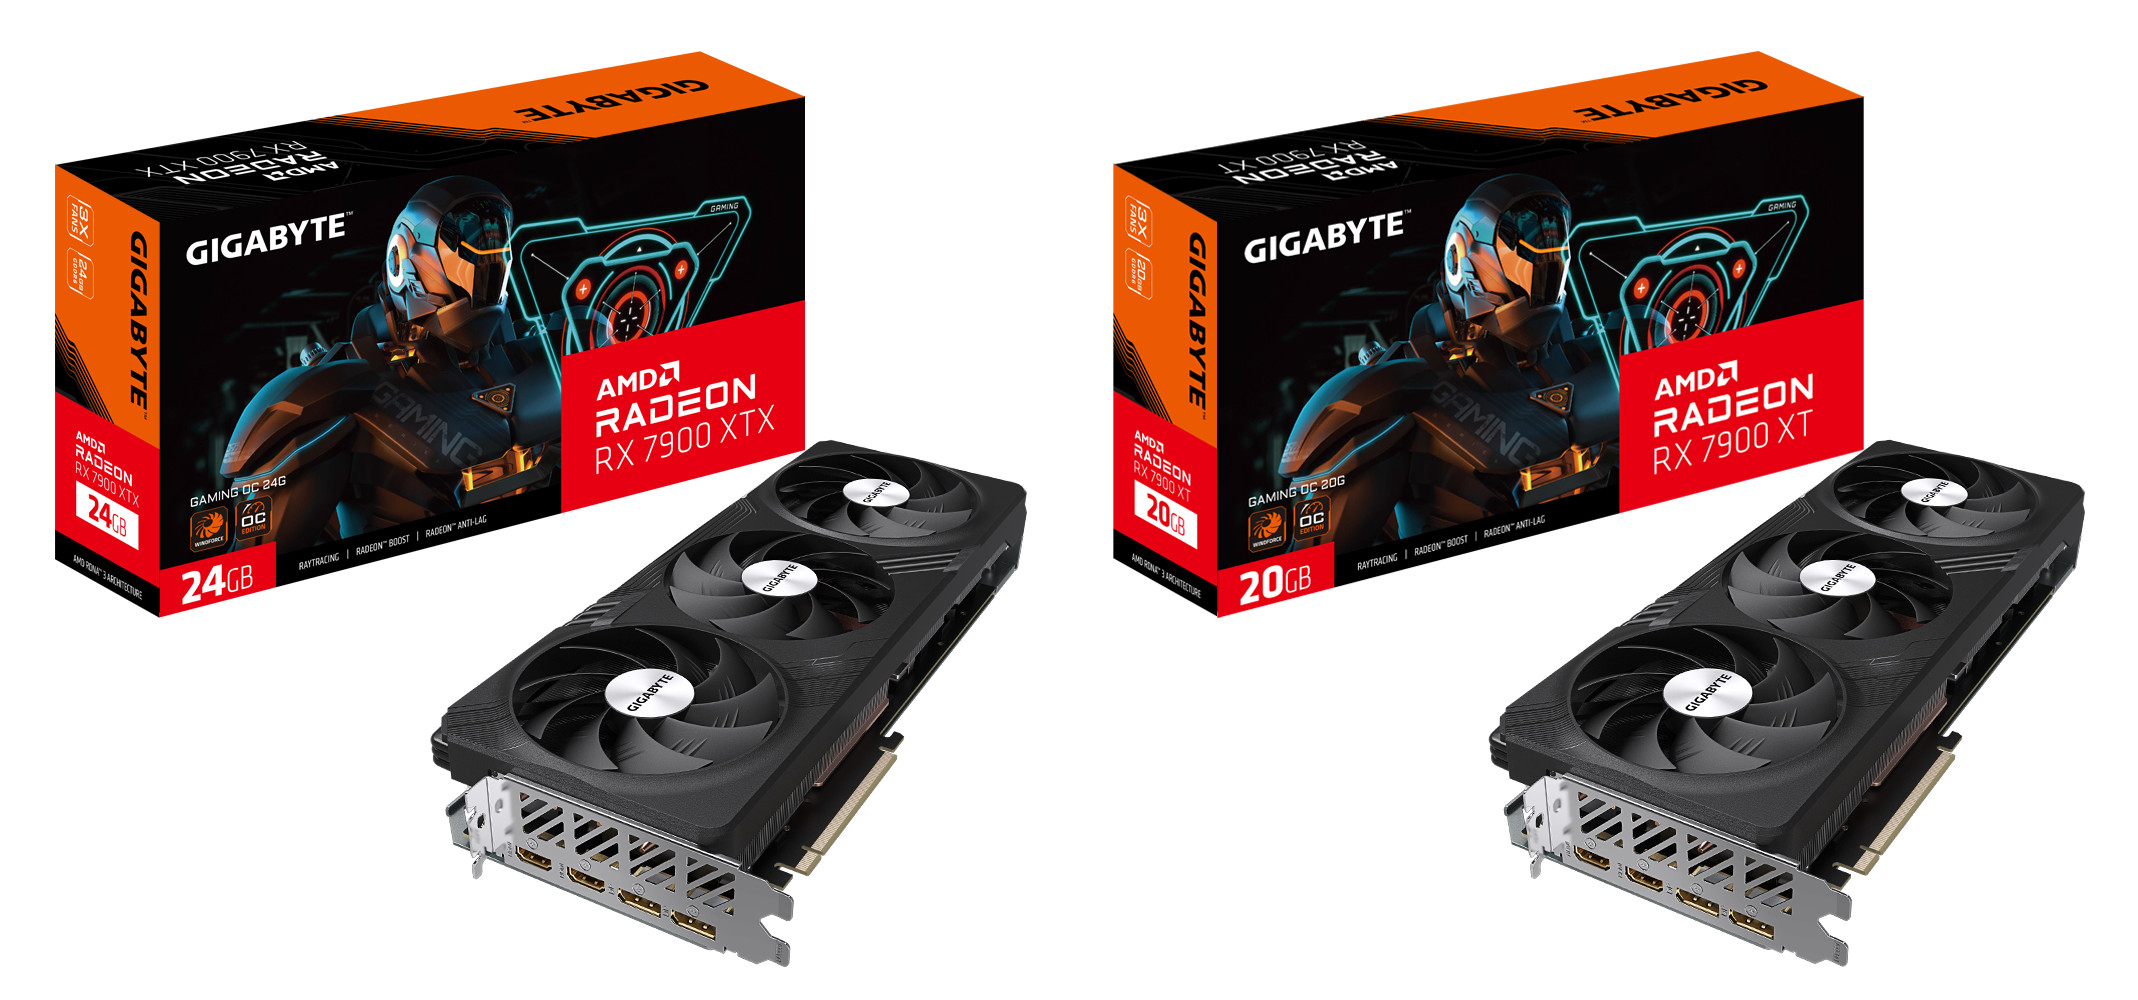 AMD RDNA 3: Gigabyte Launches AMD Radeon™ RX 7900 Series Graphics Cards